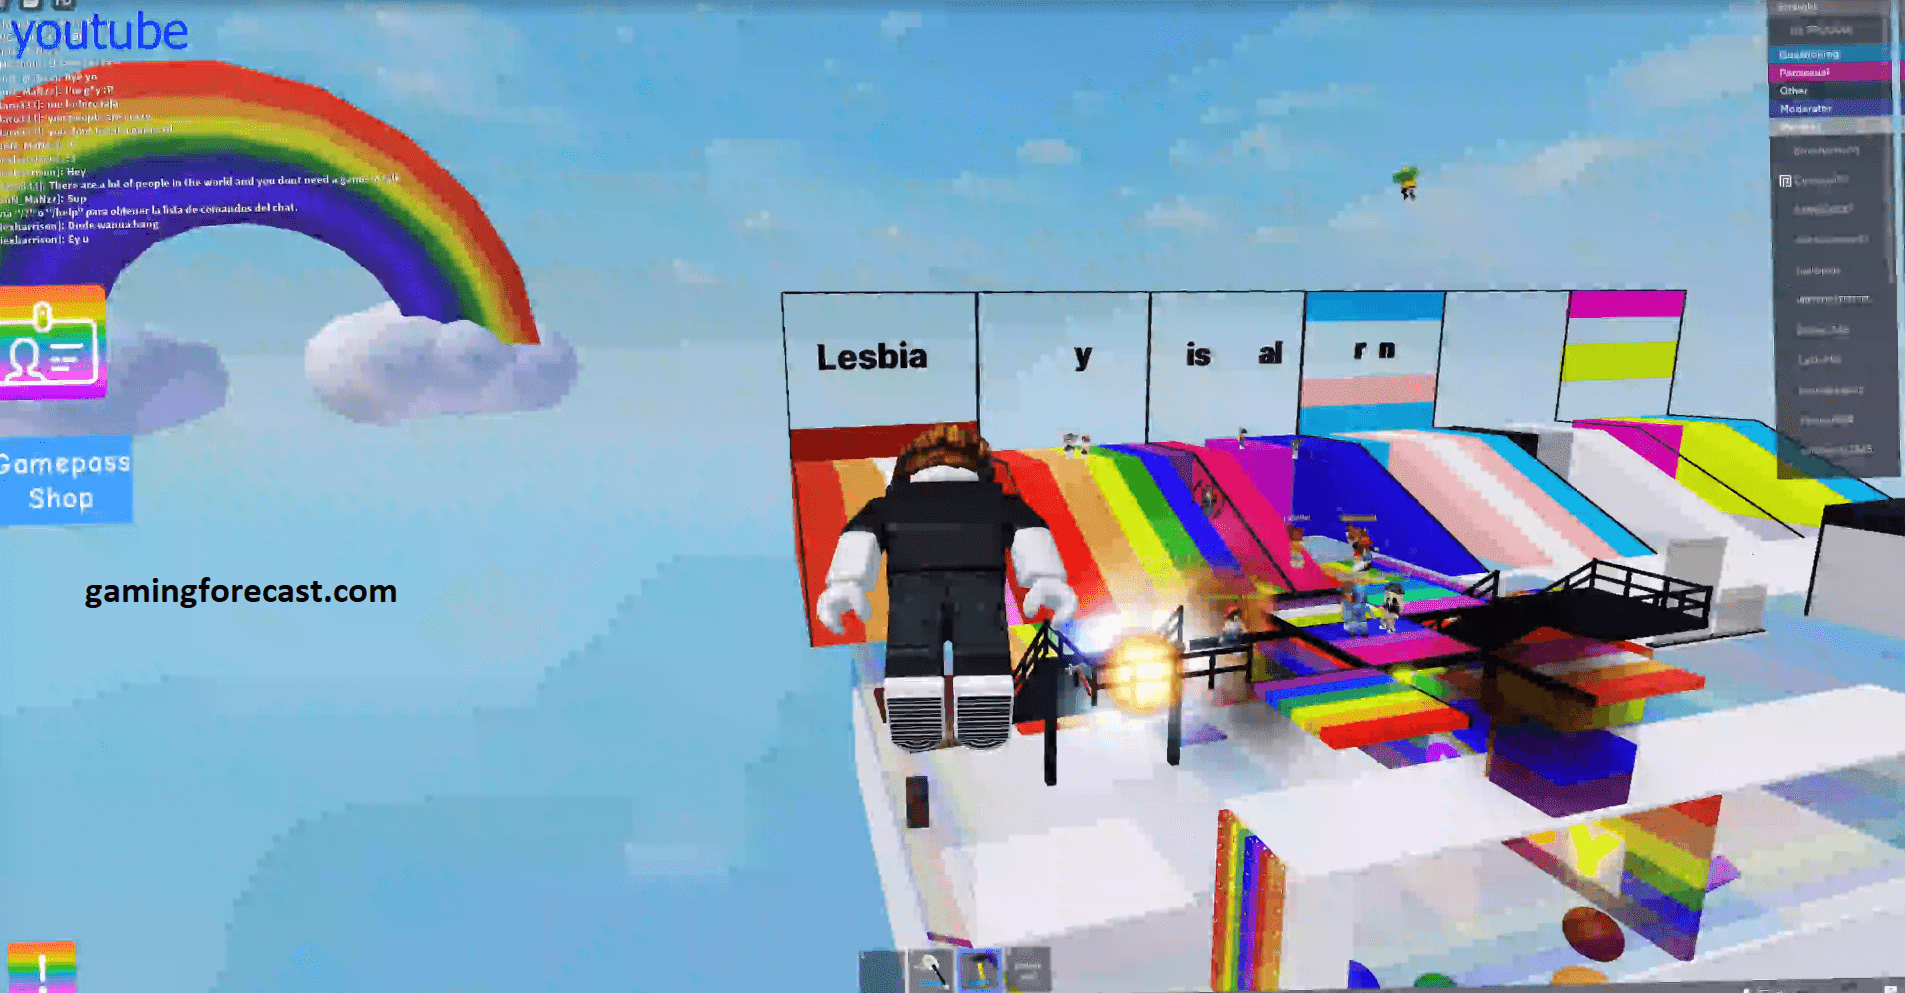 Roblox Hack Download Pc Destroy Lobby Fly Aimbot Scripts 2021 Gaming Forecast Download Free Online Game Hacks - working roblox exploit november 2021